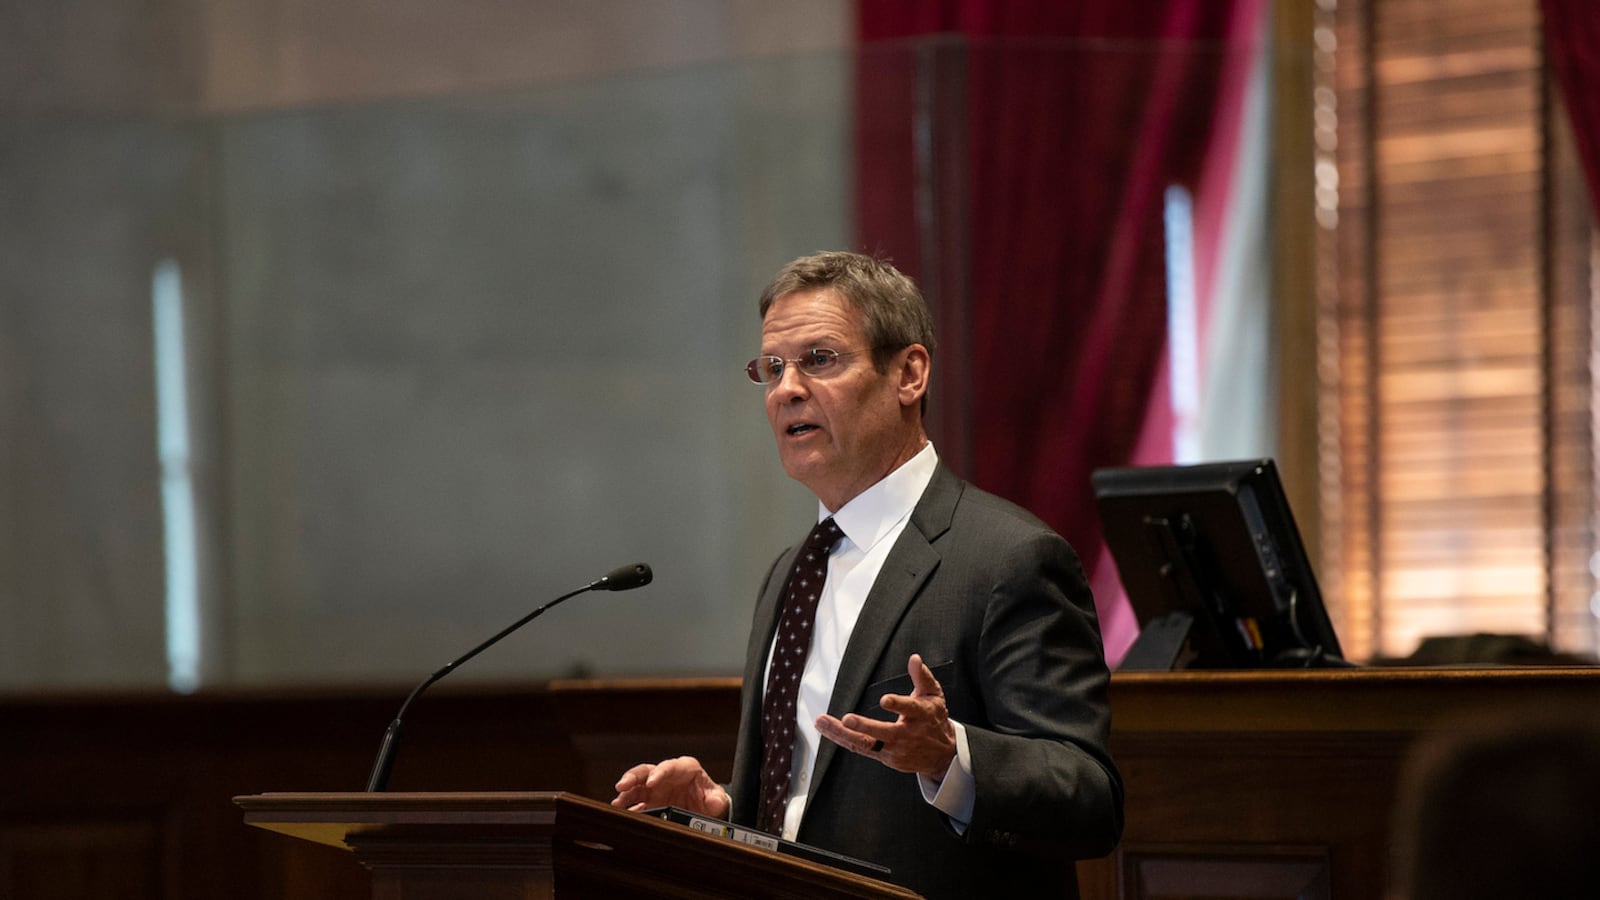 Gov. Bill Lee has proposed an education voucher plan that his administration will now try to pass in the Tennessee General Assembly.